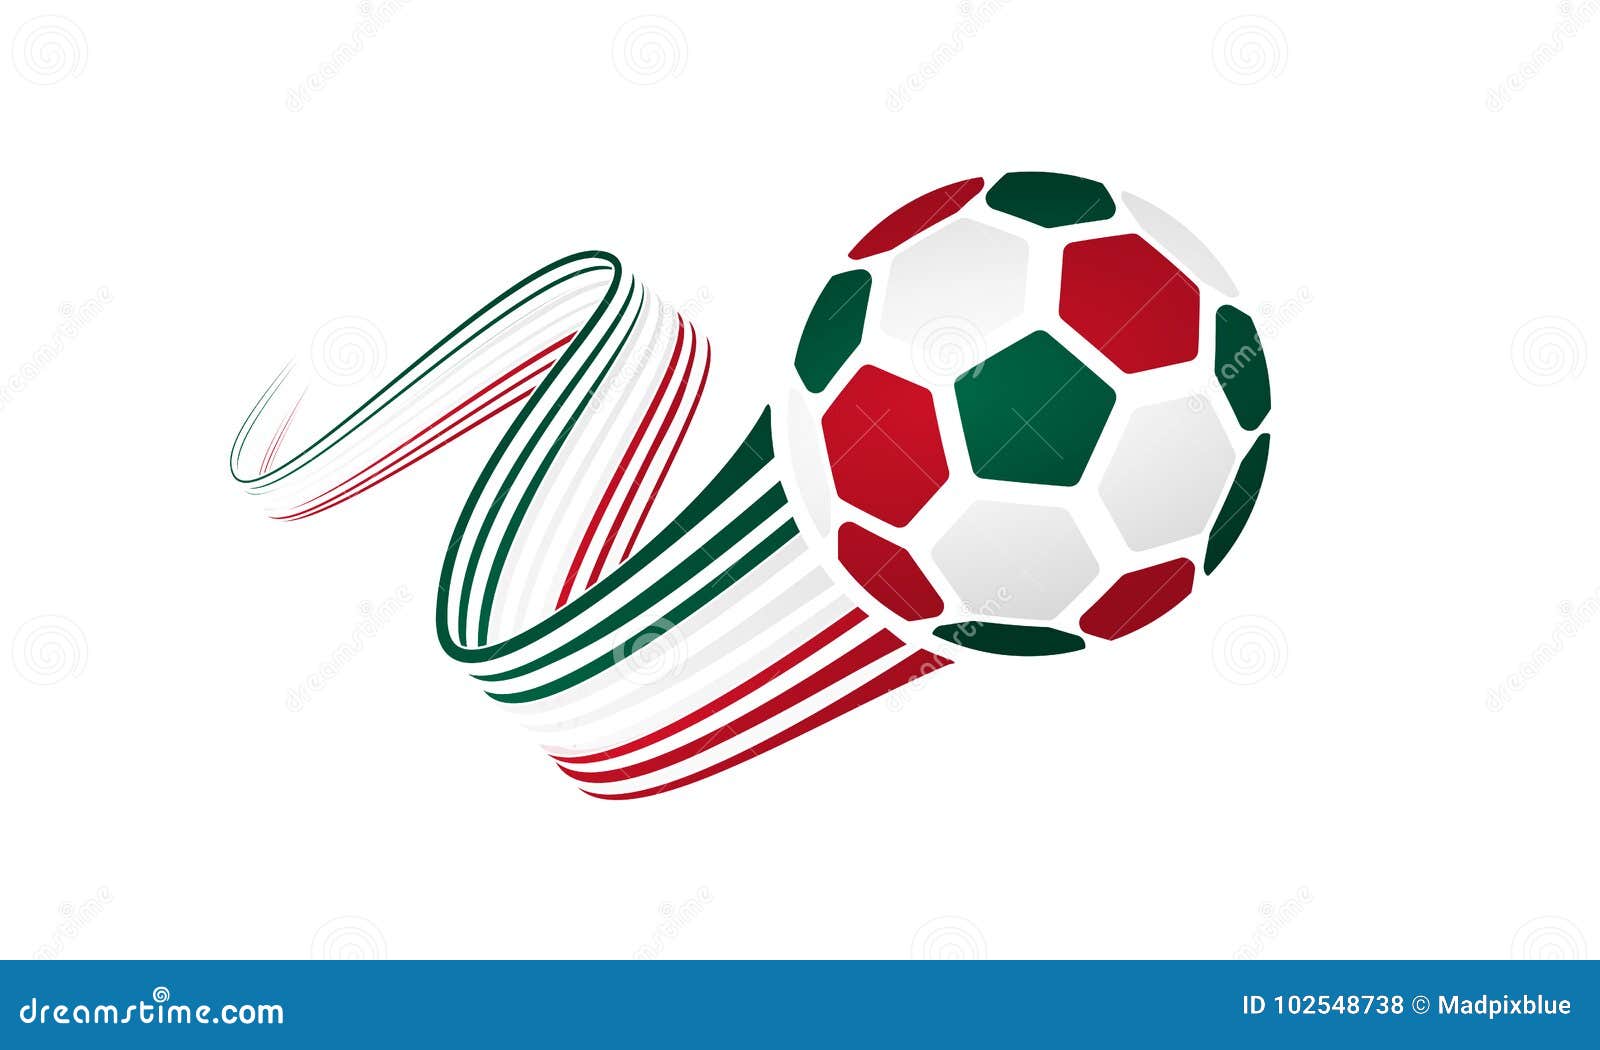 Mexican soccer team stock vector. Illustration of mexic - 102548738